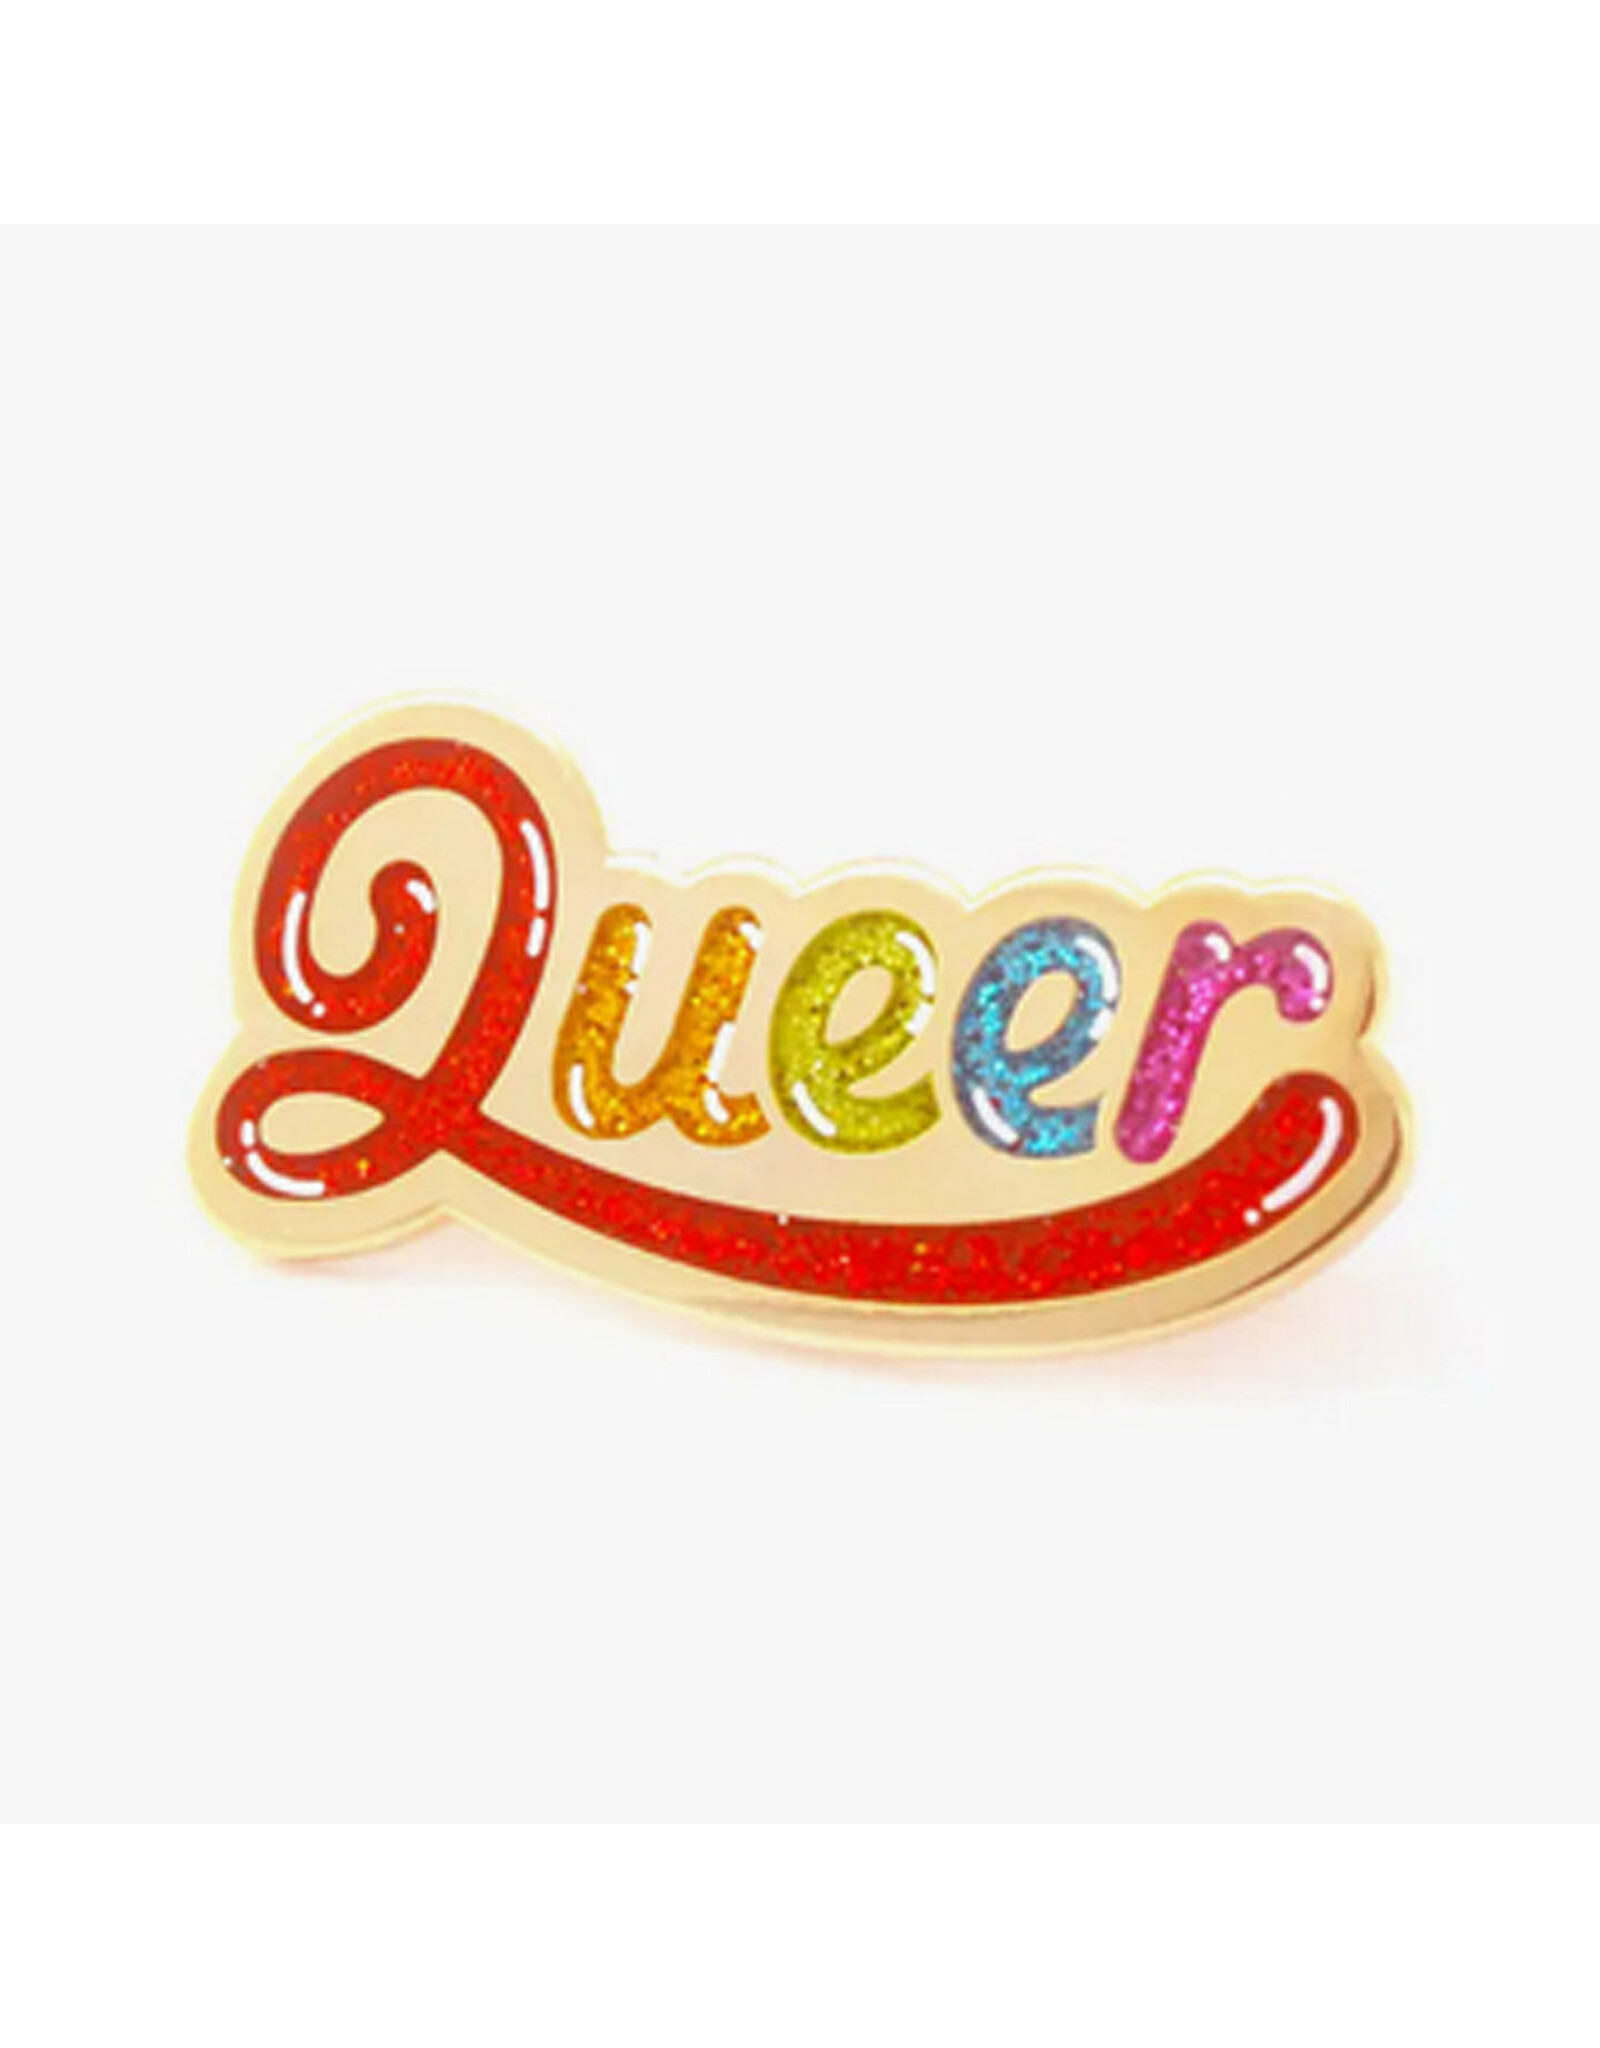 Queer Pin - Glittery